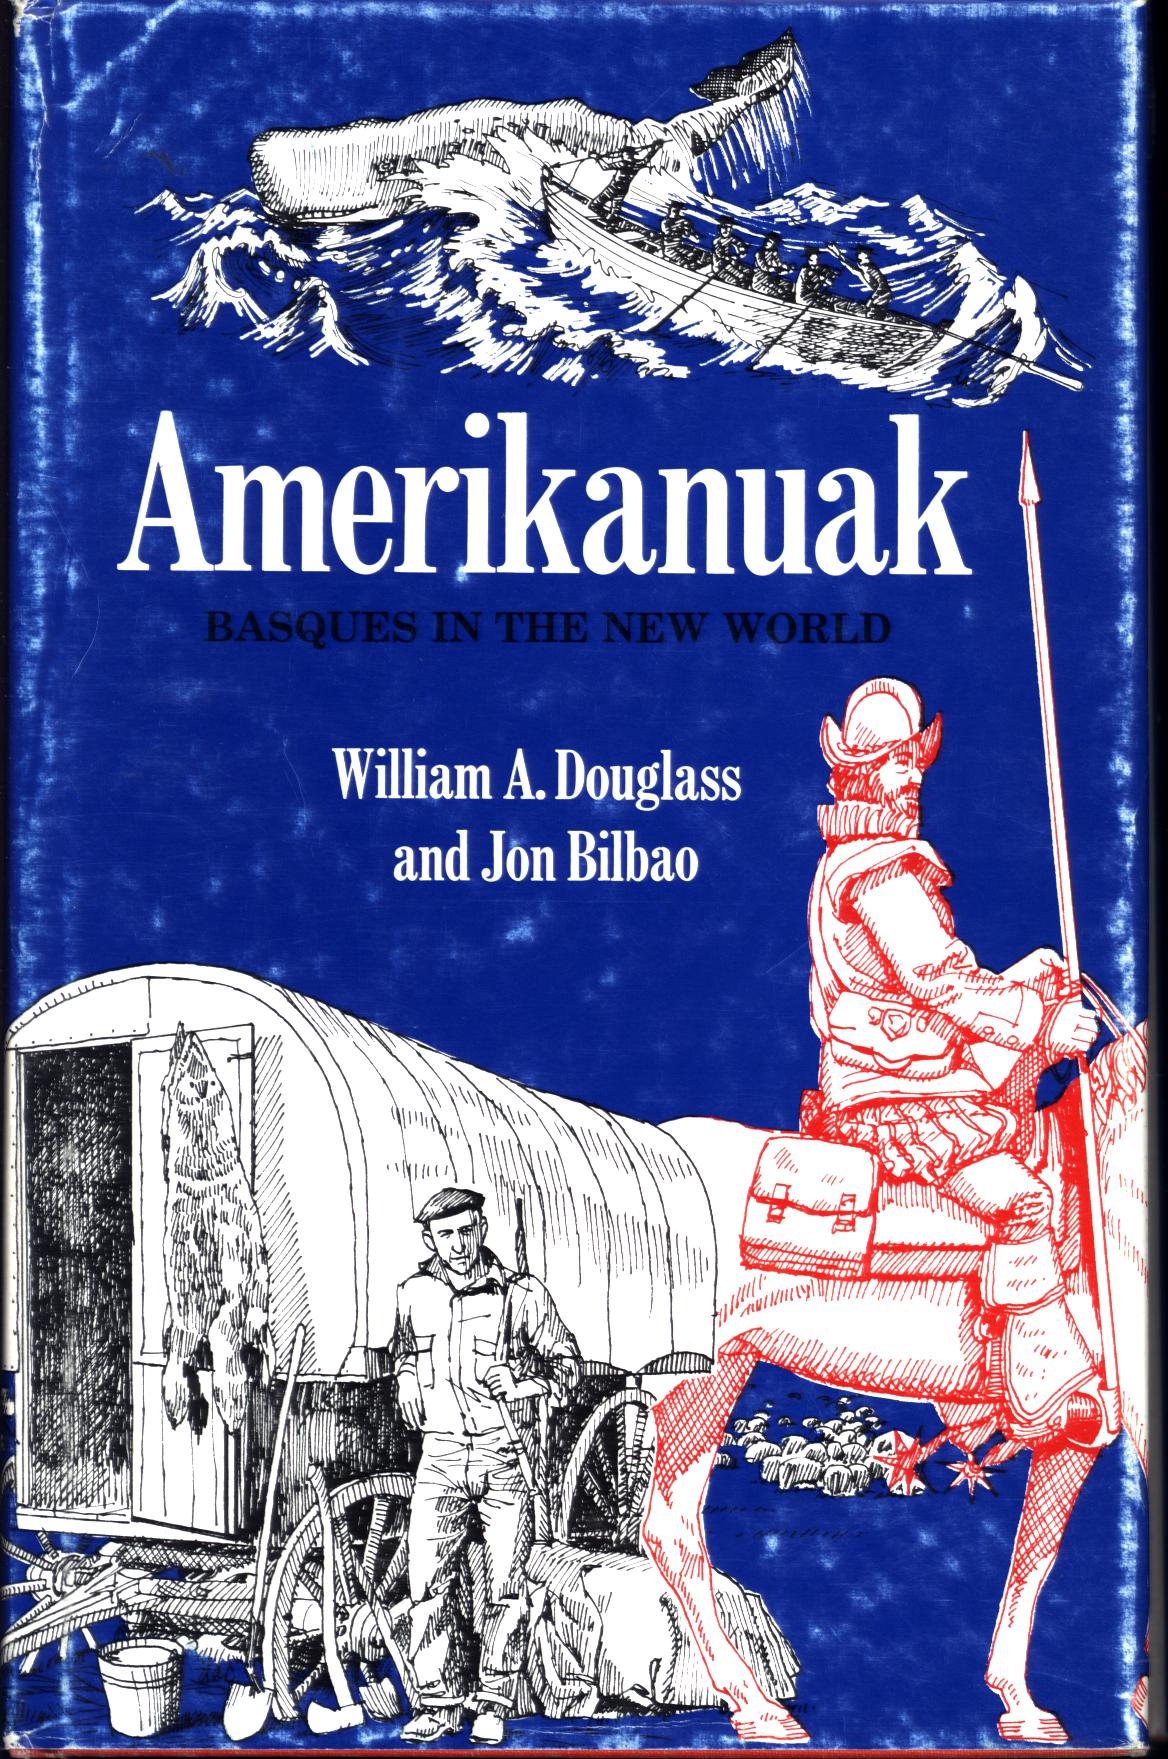 AMERIKANUAK: Basques in the New World.